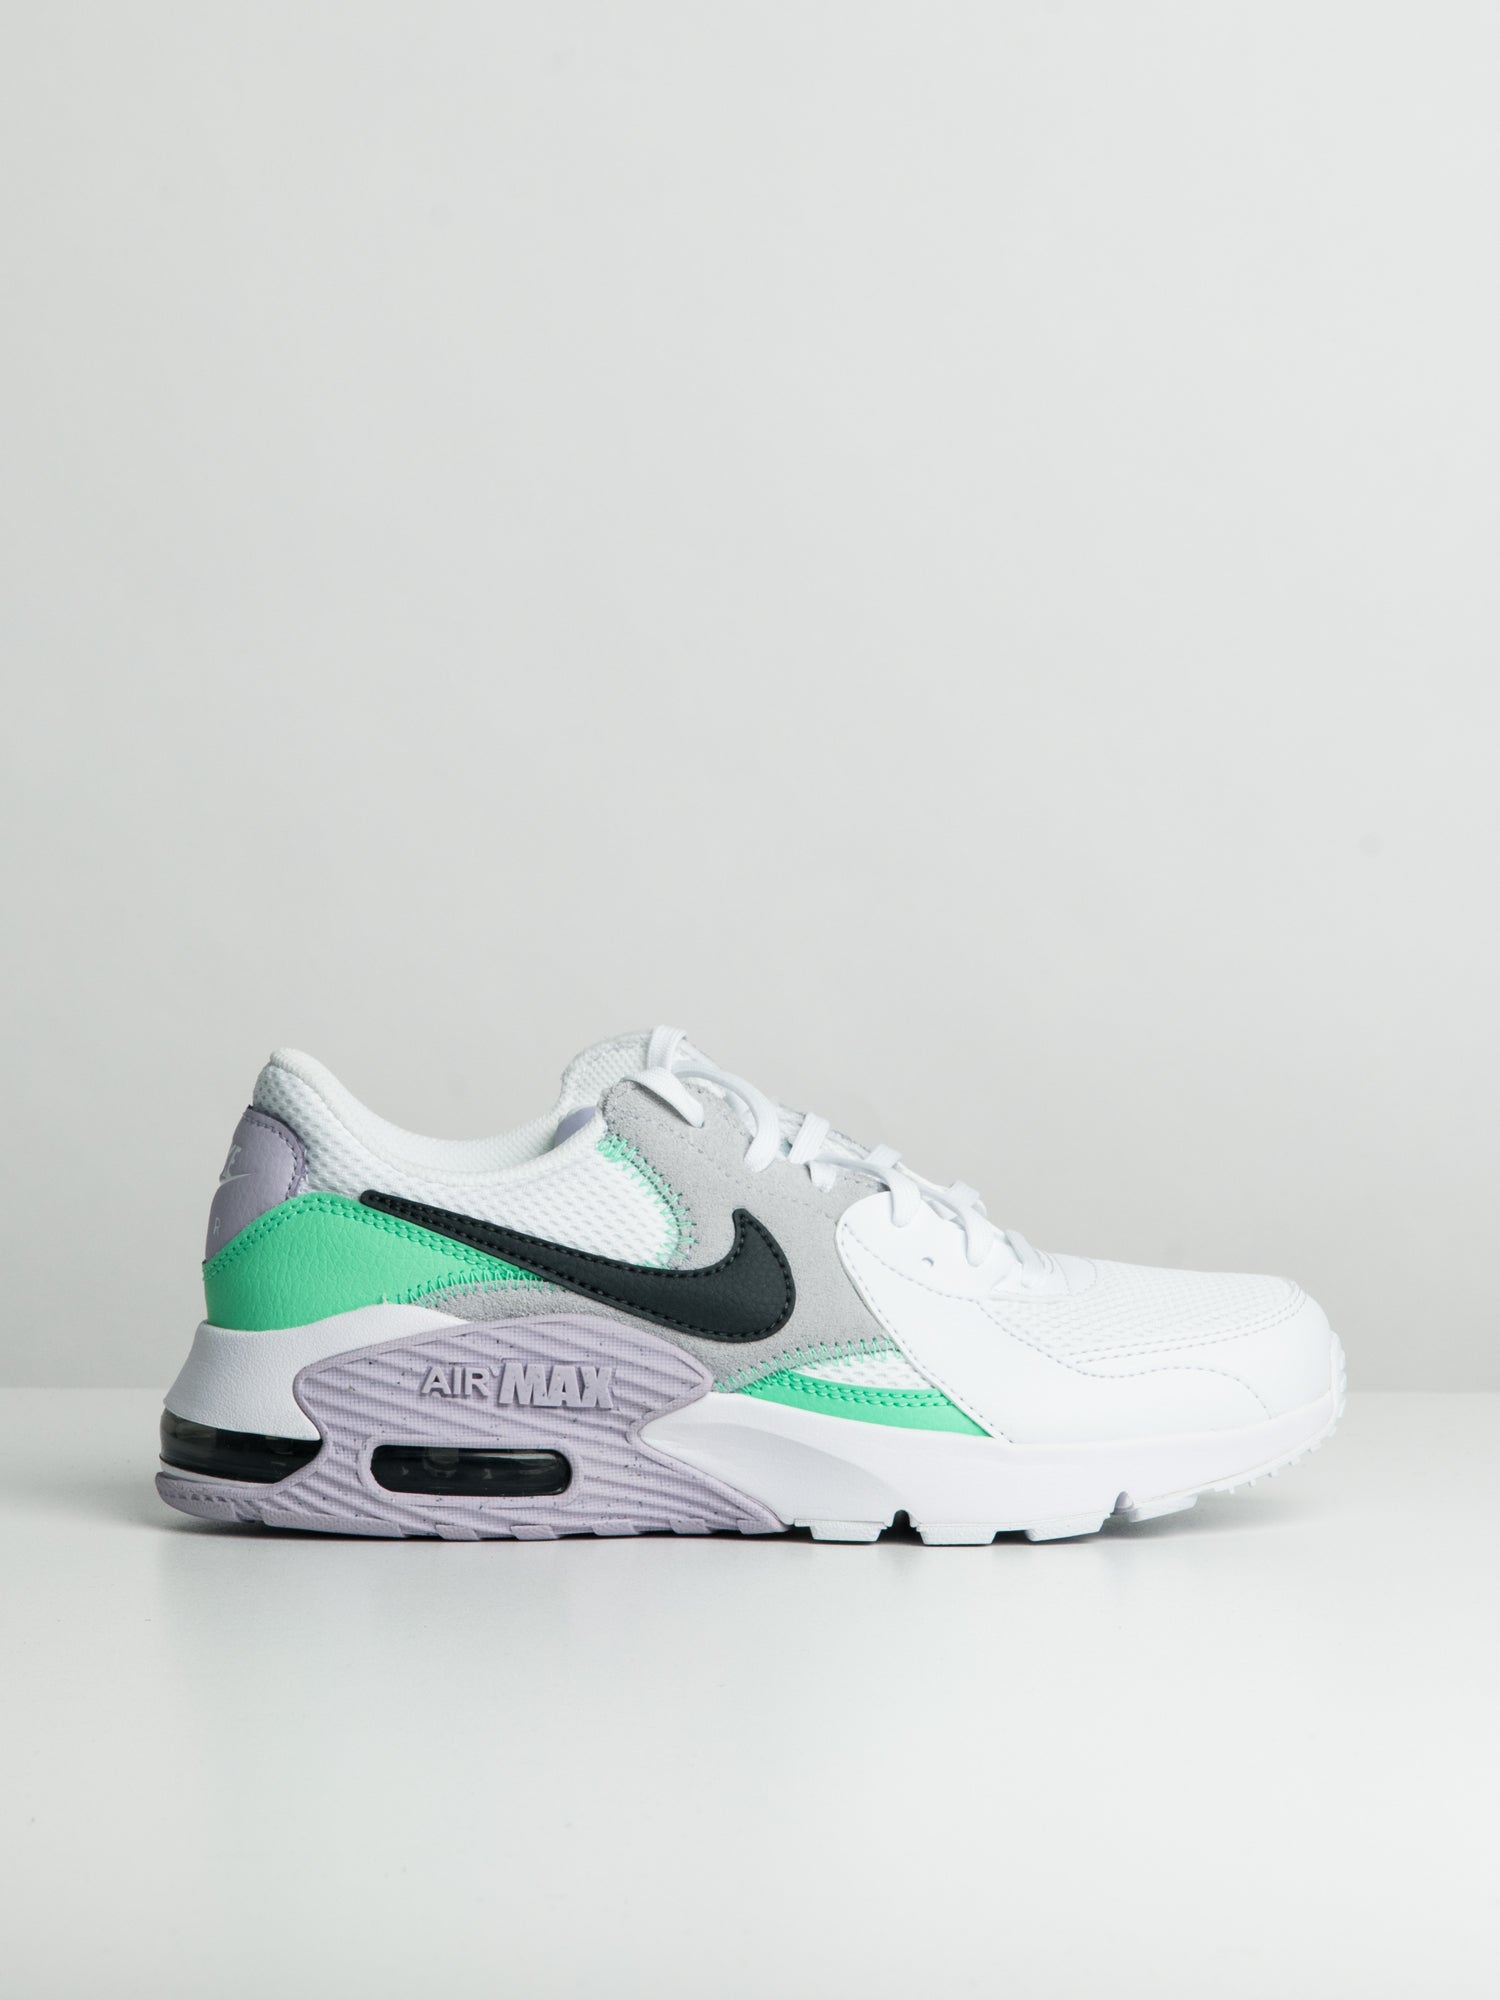 Nike Women's Air Max Excee Sneakers - White/Grey/Black/Hyper Pink |  Catch.com.au